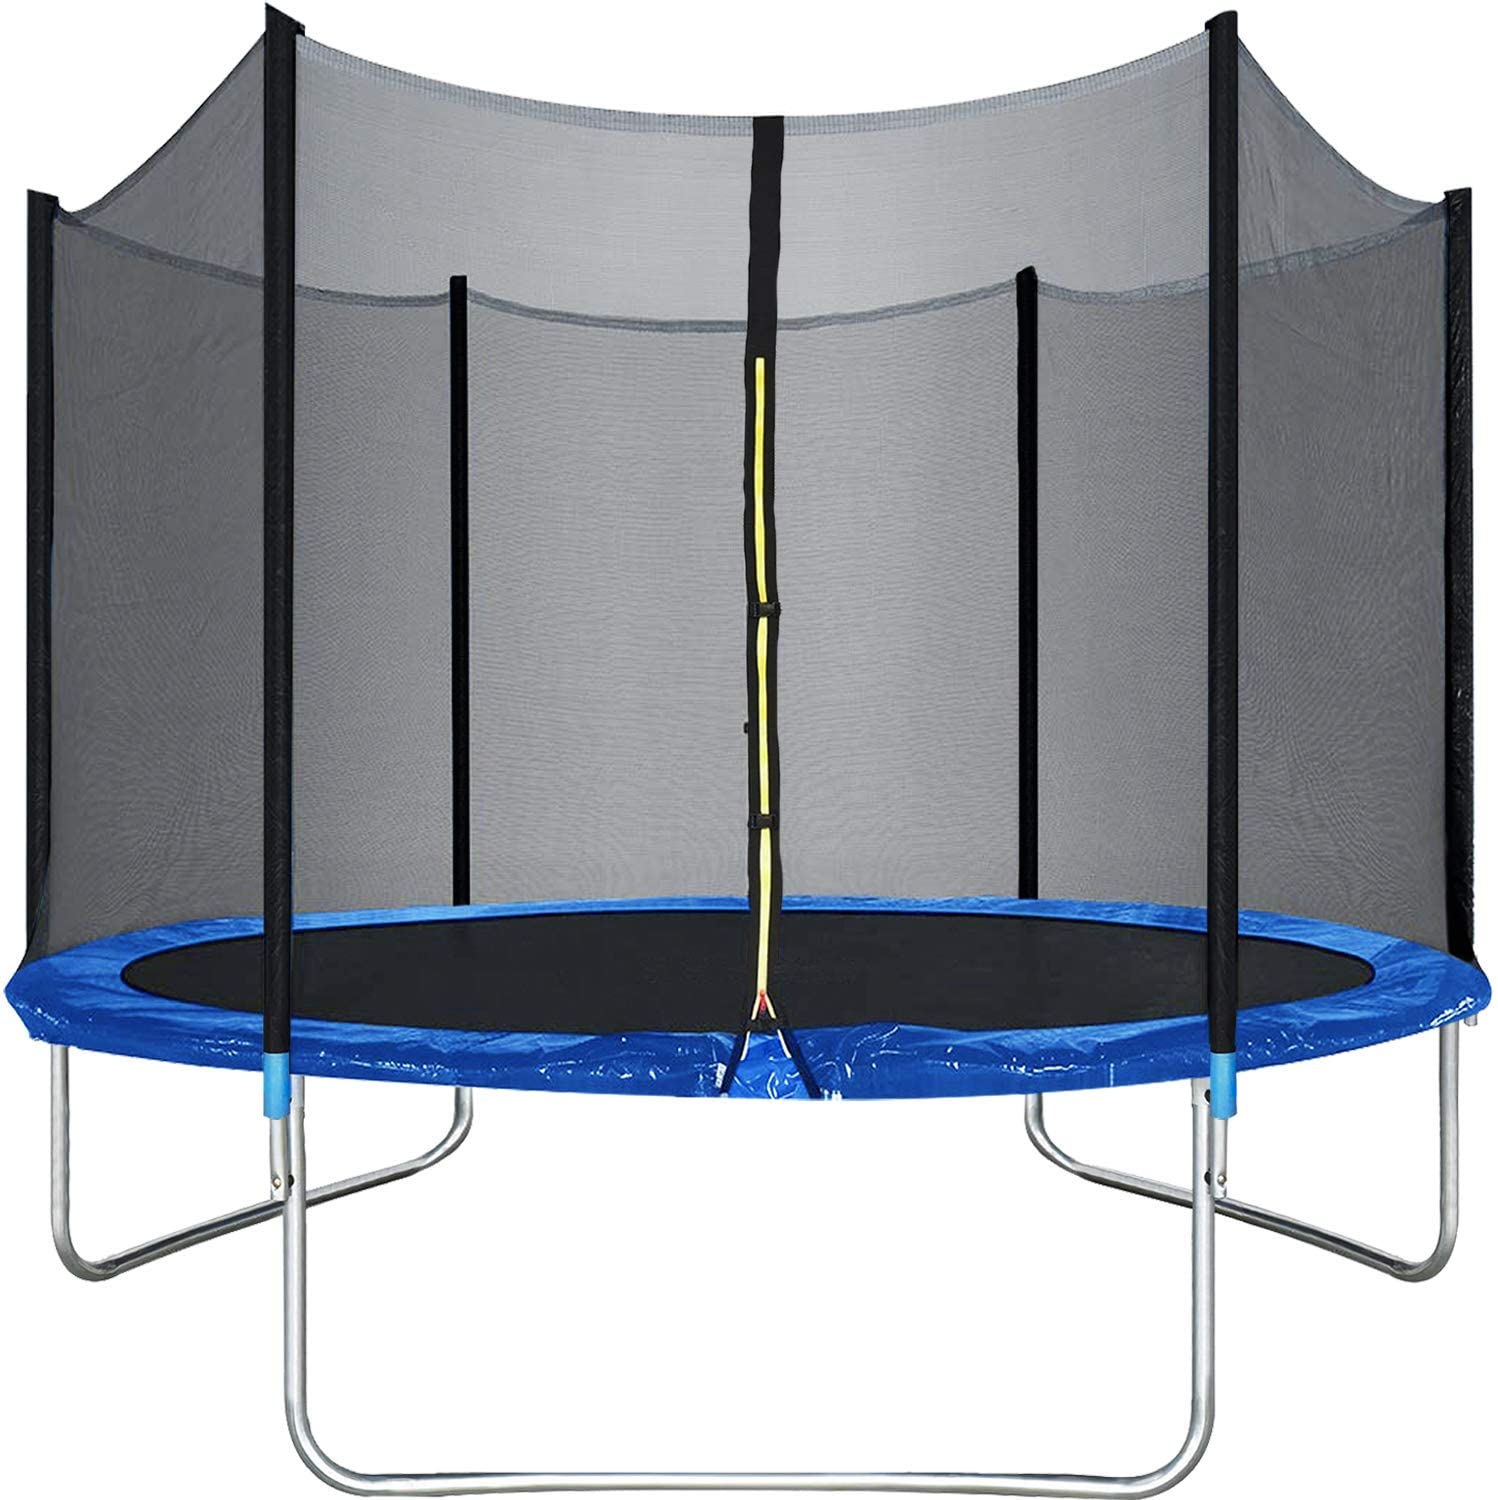 Best Massage 10 Ft Trampoline with Enclosure Net Outdoor Fitness Trampoline PVC Spring Cover Padding